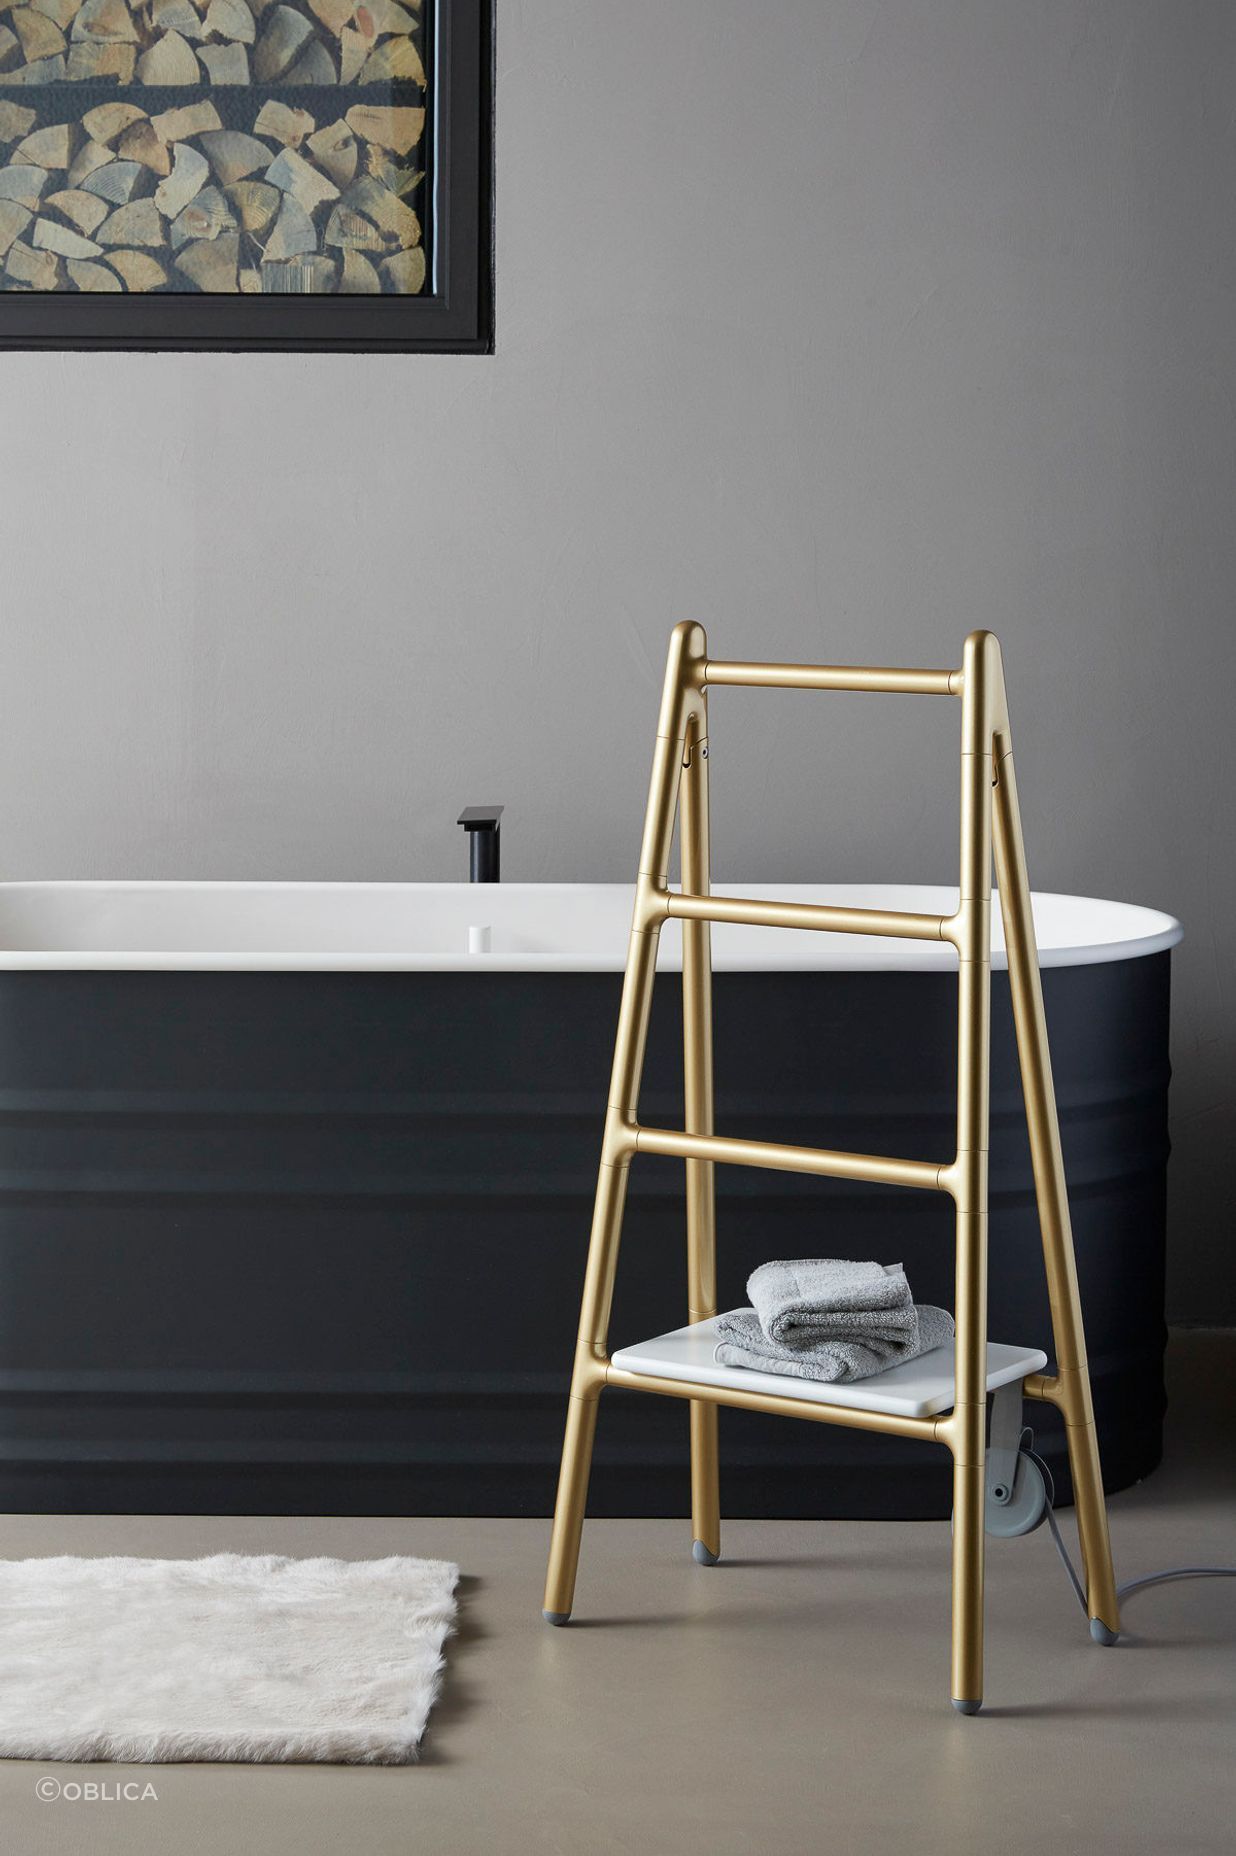 The Tubes Scaletta Electric Radiator is an ingeneous heated towel ladder rack from Oblica